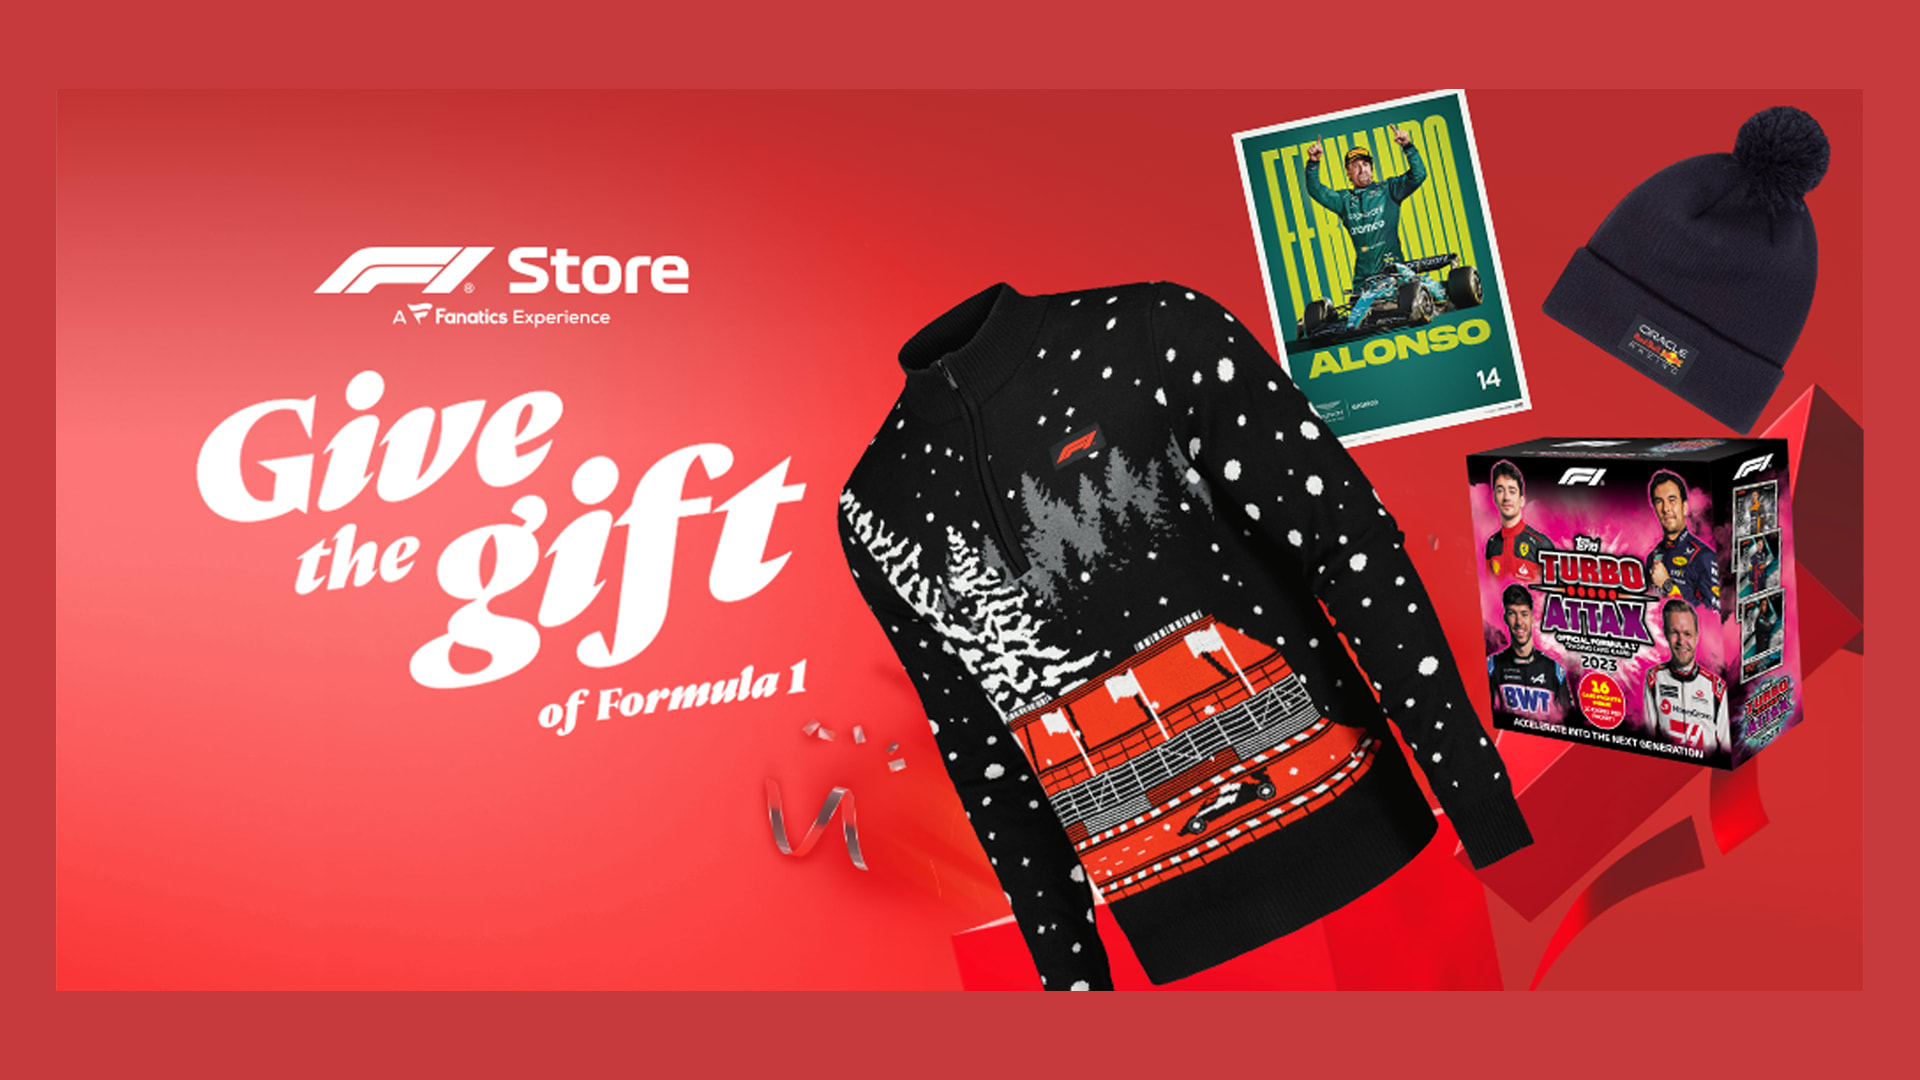 Find the perfect Christmas present for your favourite F1 fan in